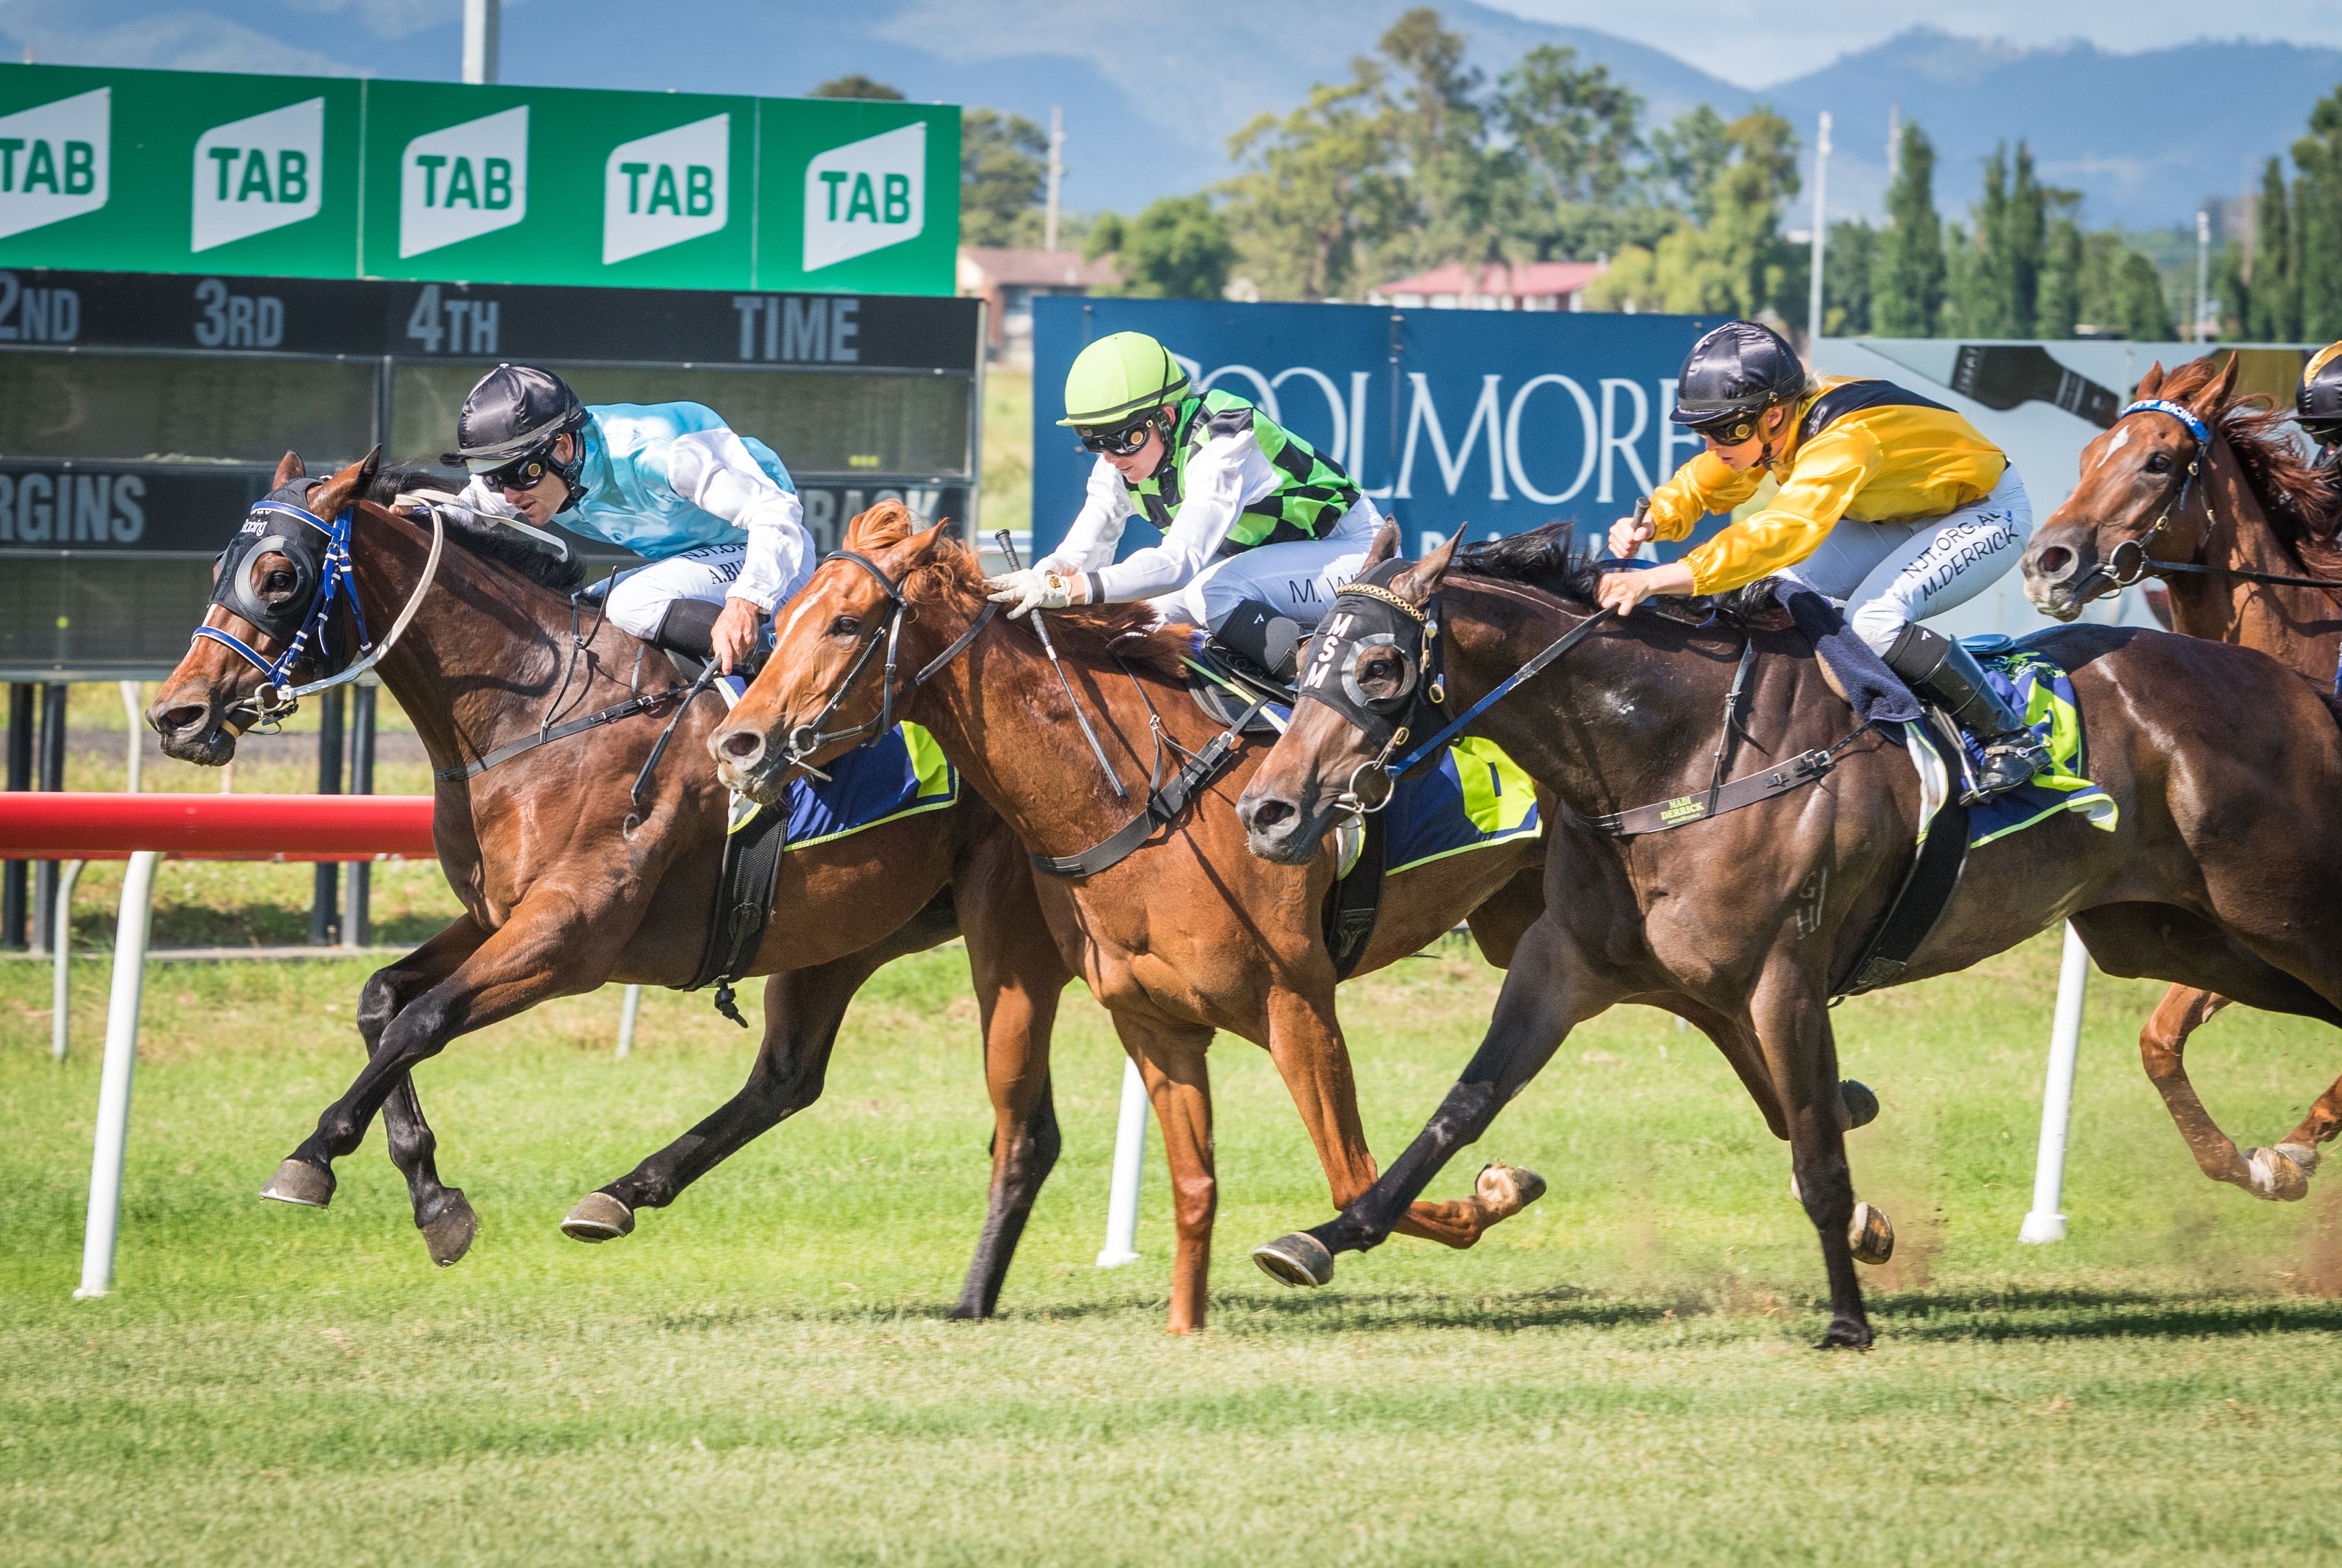 Get Trackside for Melbourne Cup at Muswellbrook Race Club